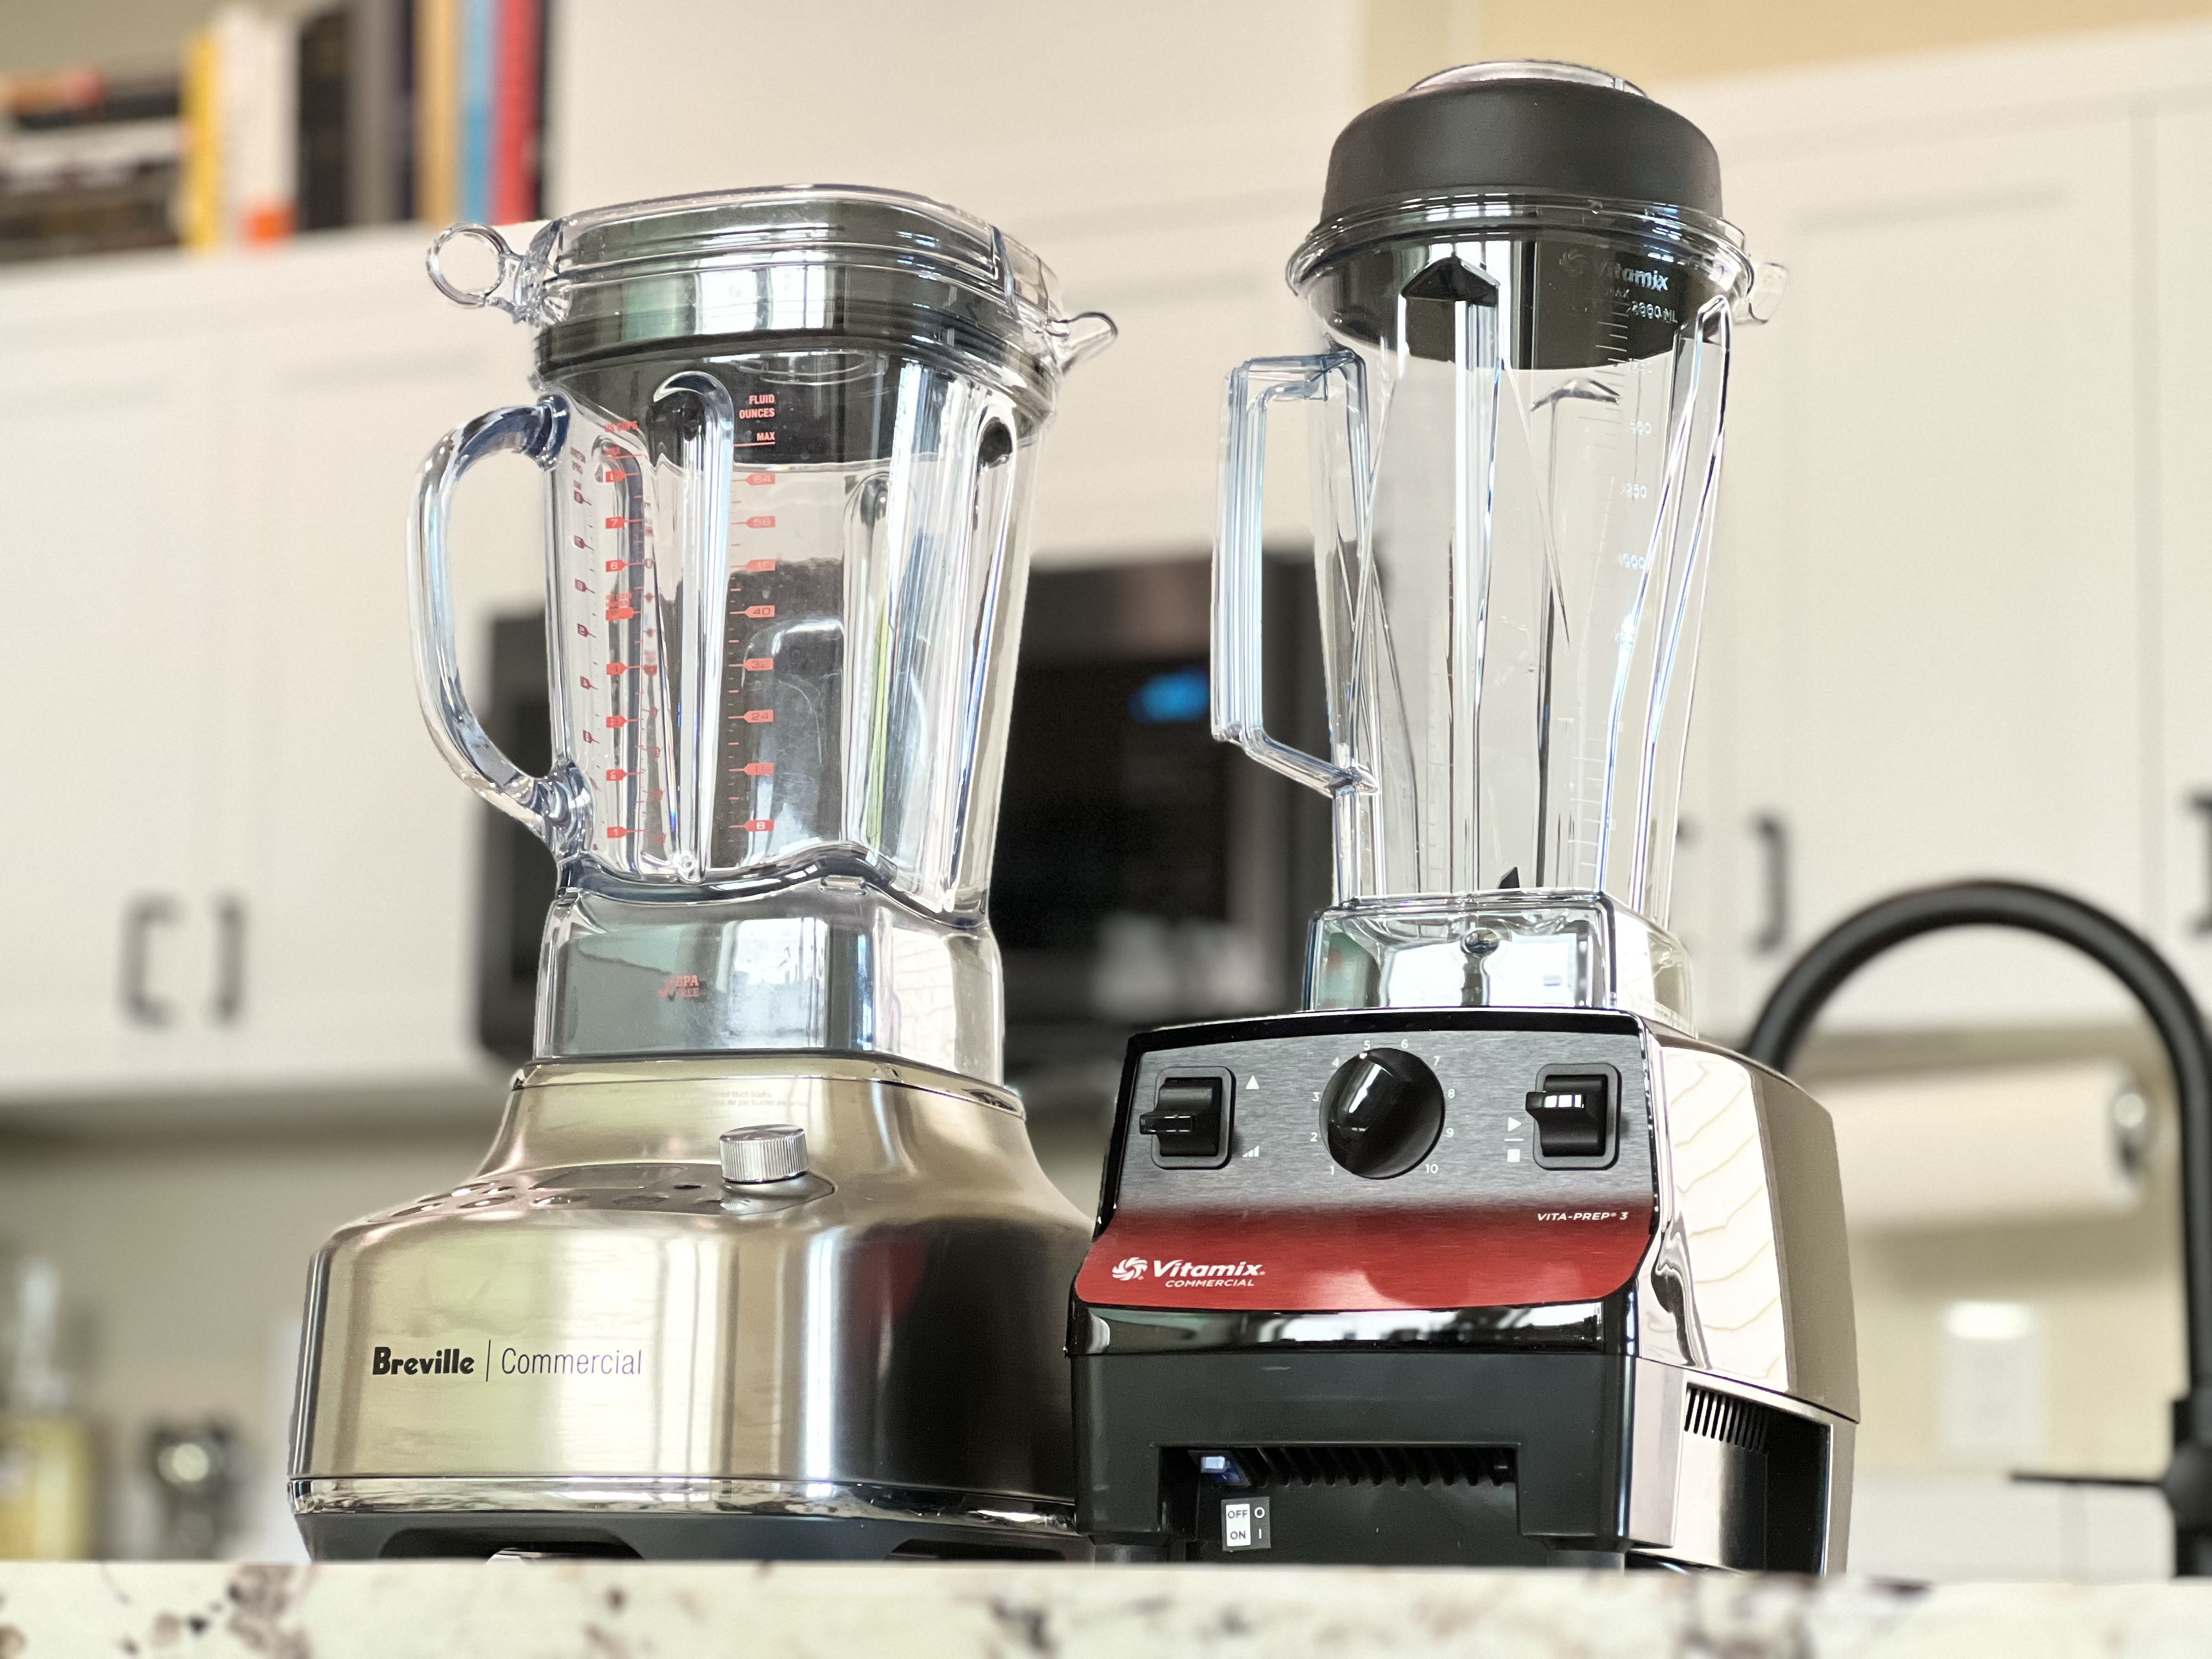 How to Clean a Vitamix? Every Hack and Tip You Need to Know